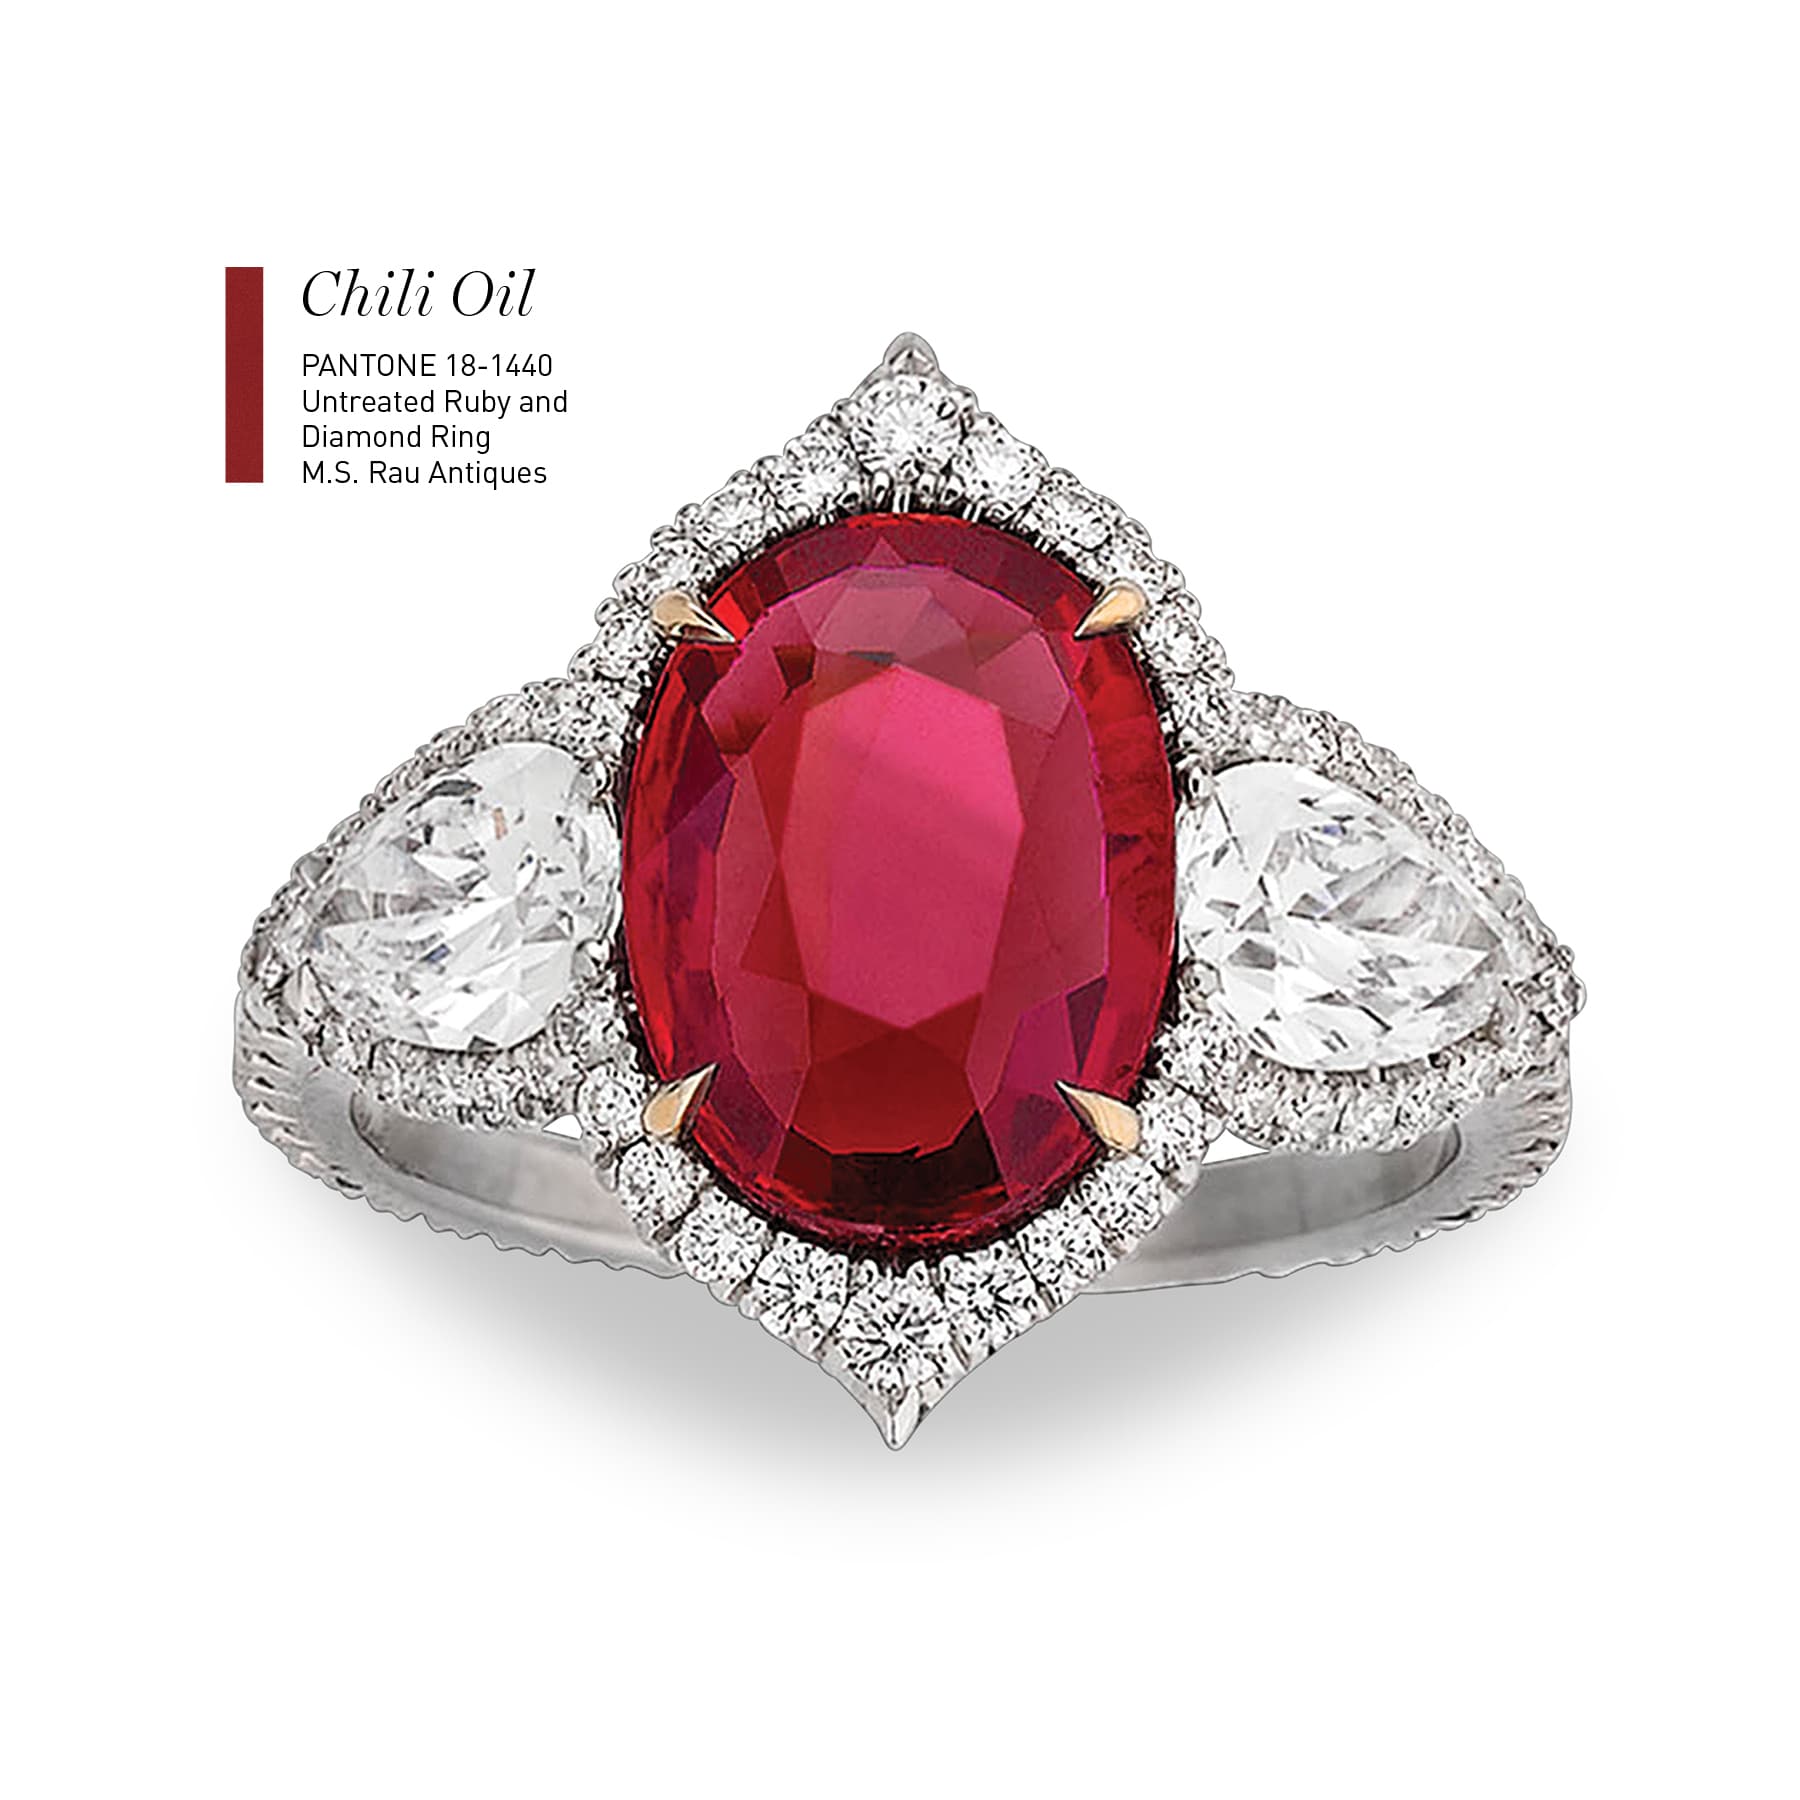 Untreated Ruby and Diamond Ring